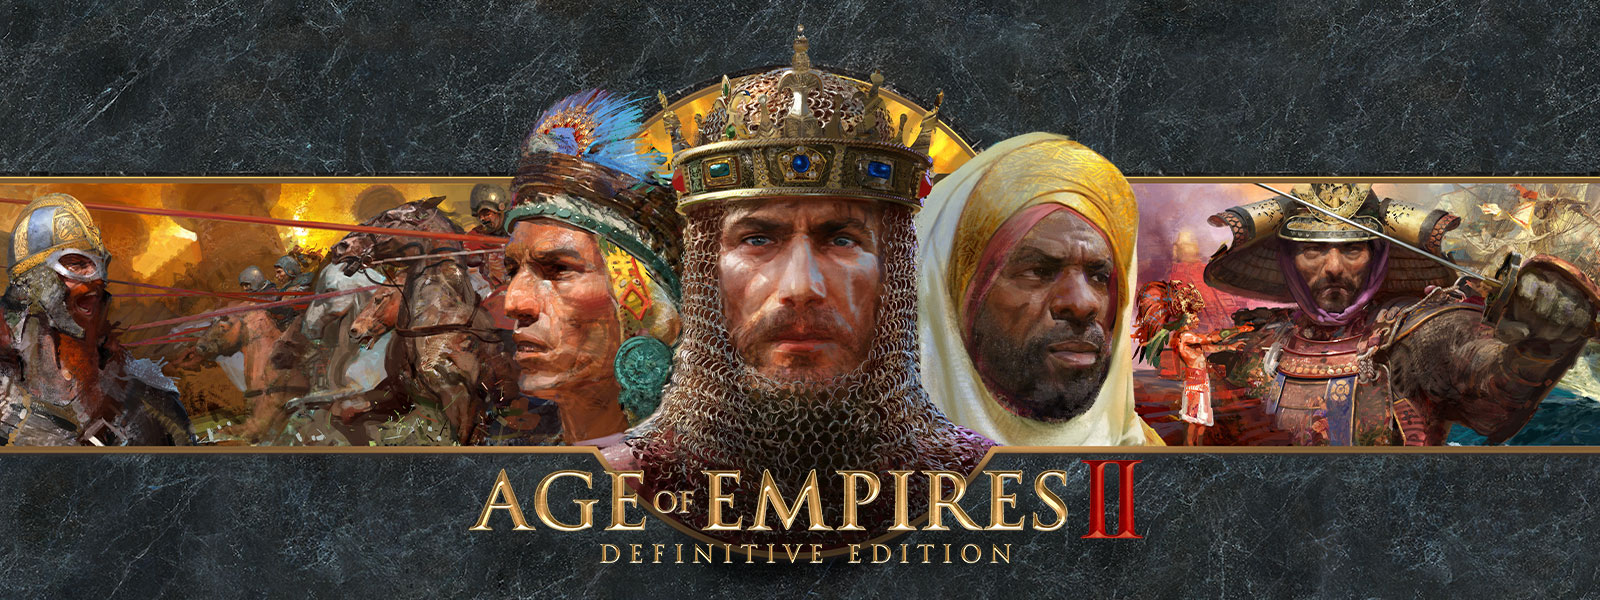 Age of Empires II: Definitive Edition logo on a grey slate background featuring war leaders and their armies